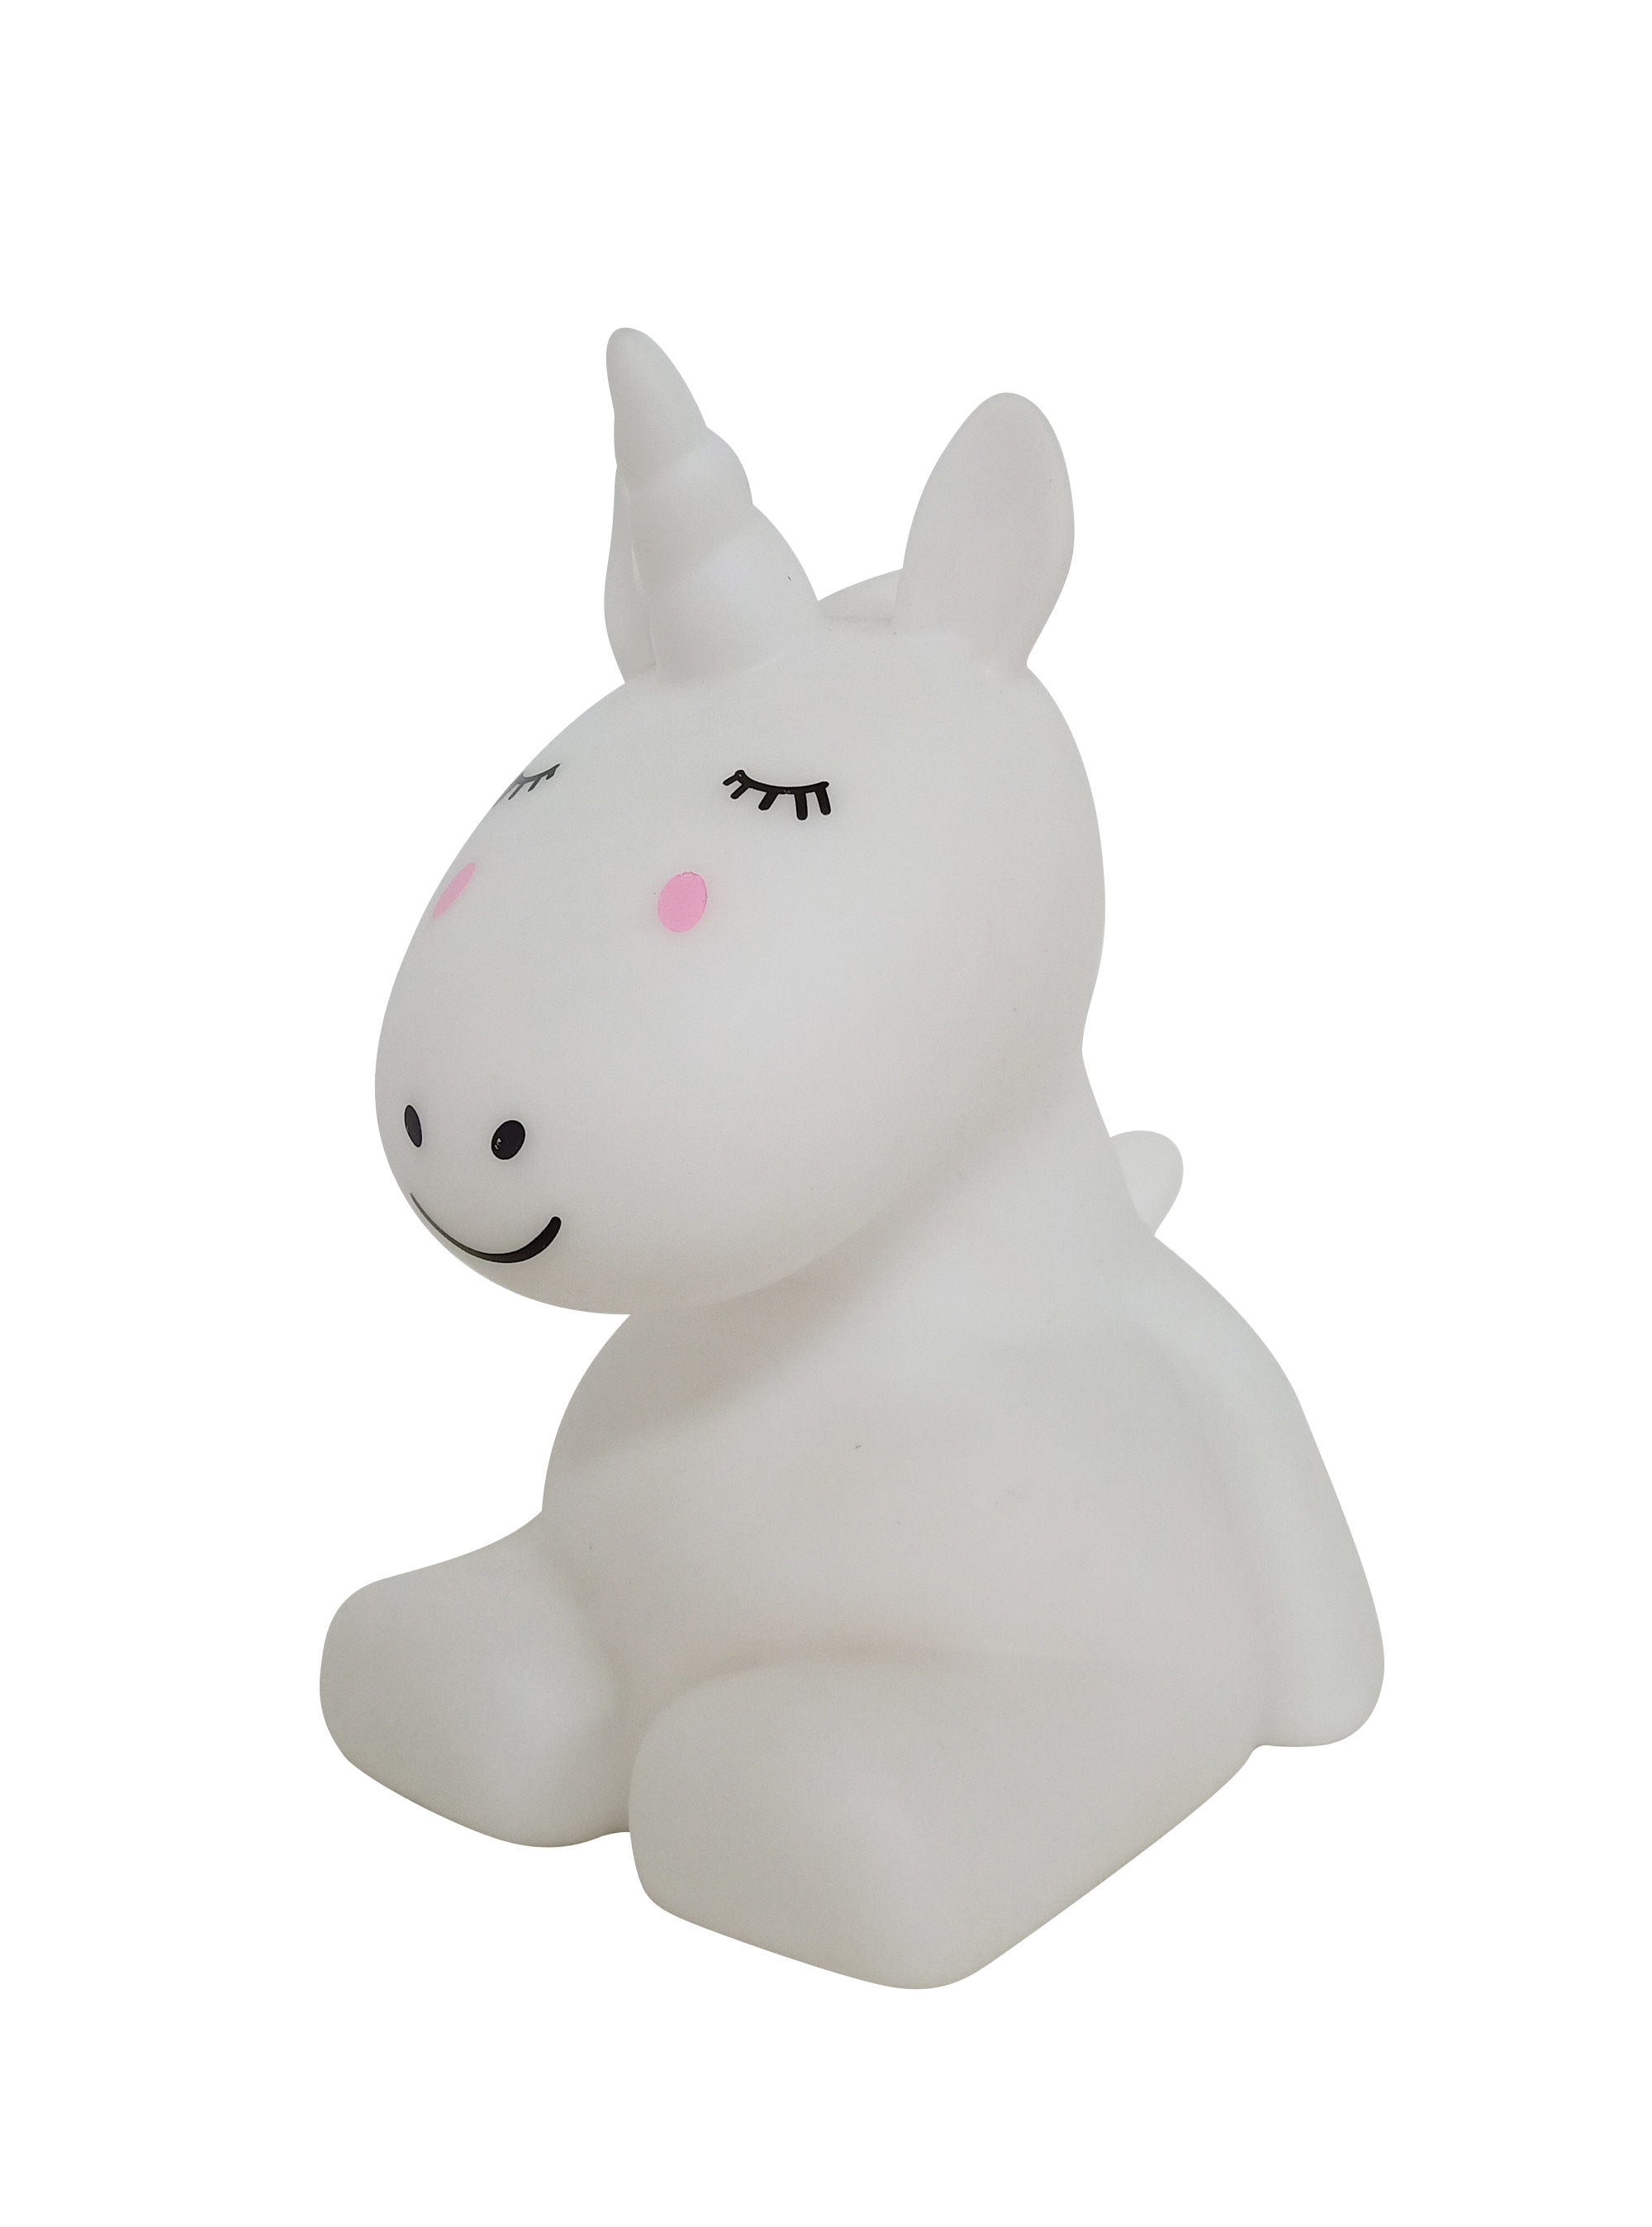 Style Selections Chelsea the Unicorn Color Changing LED Night Light